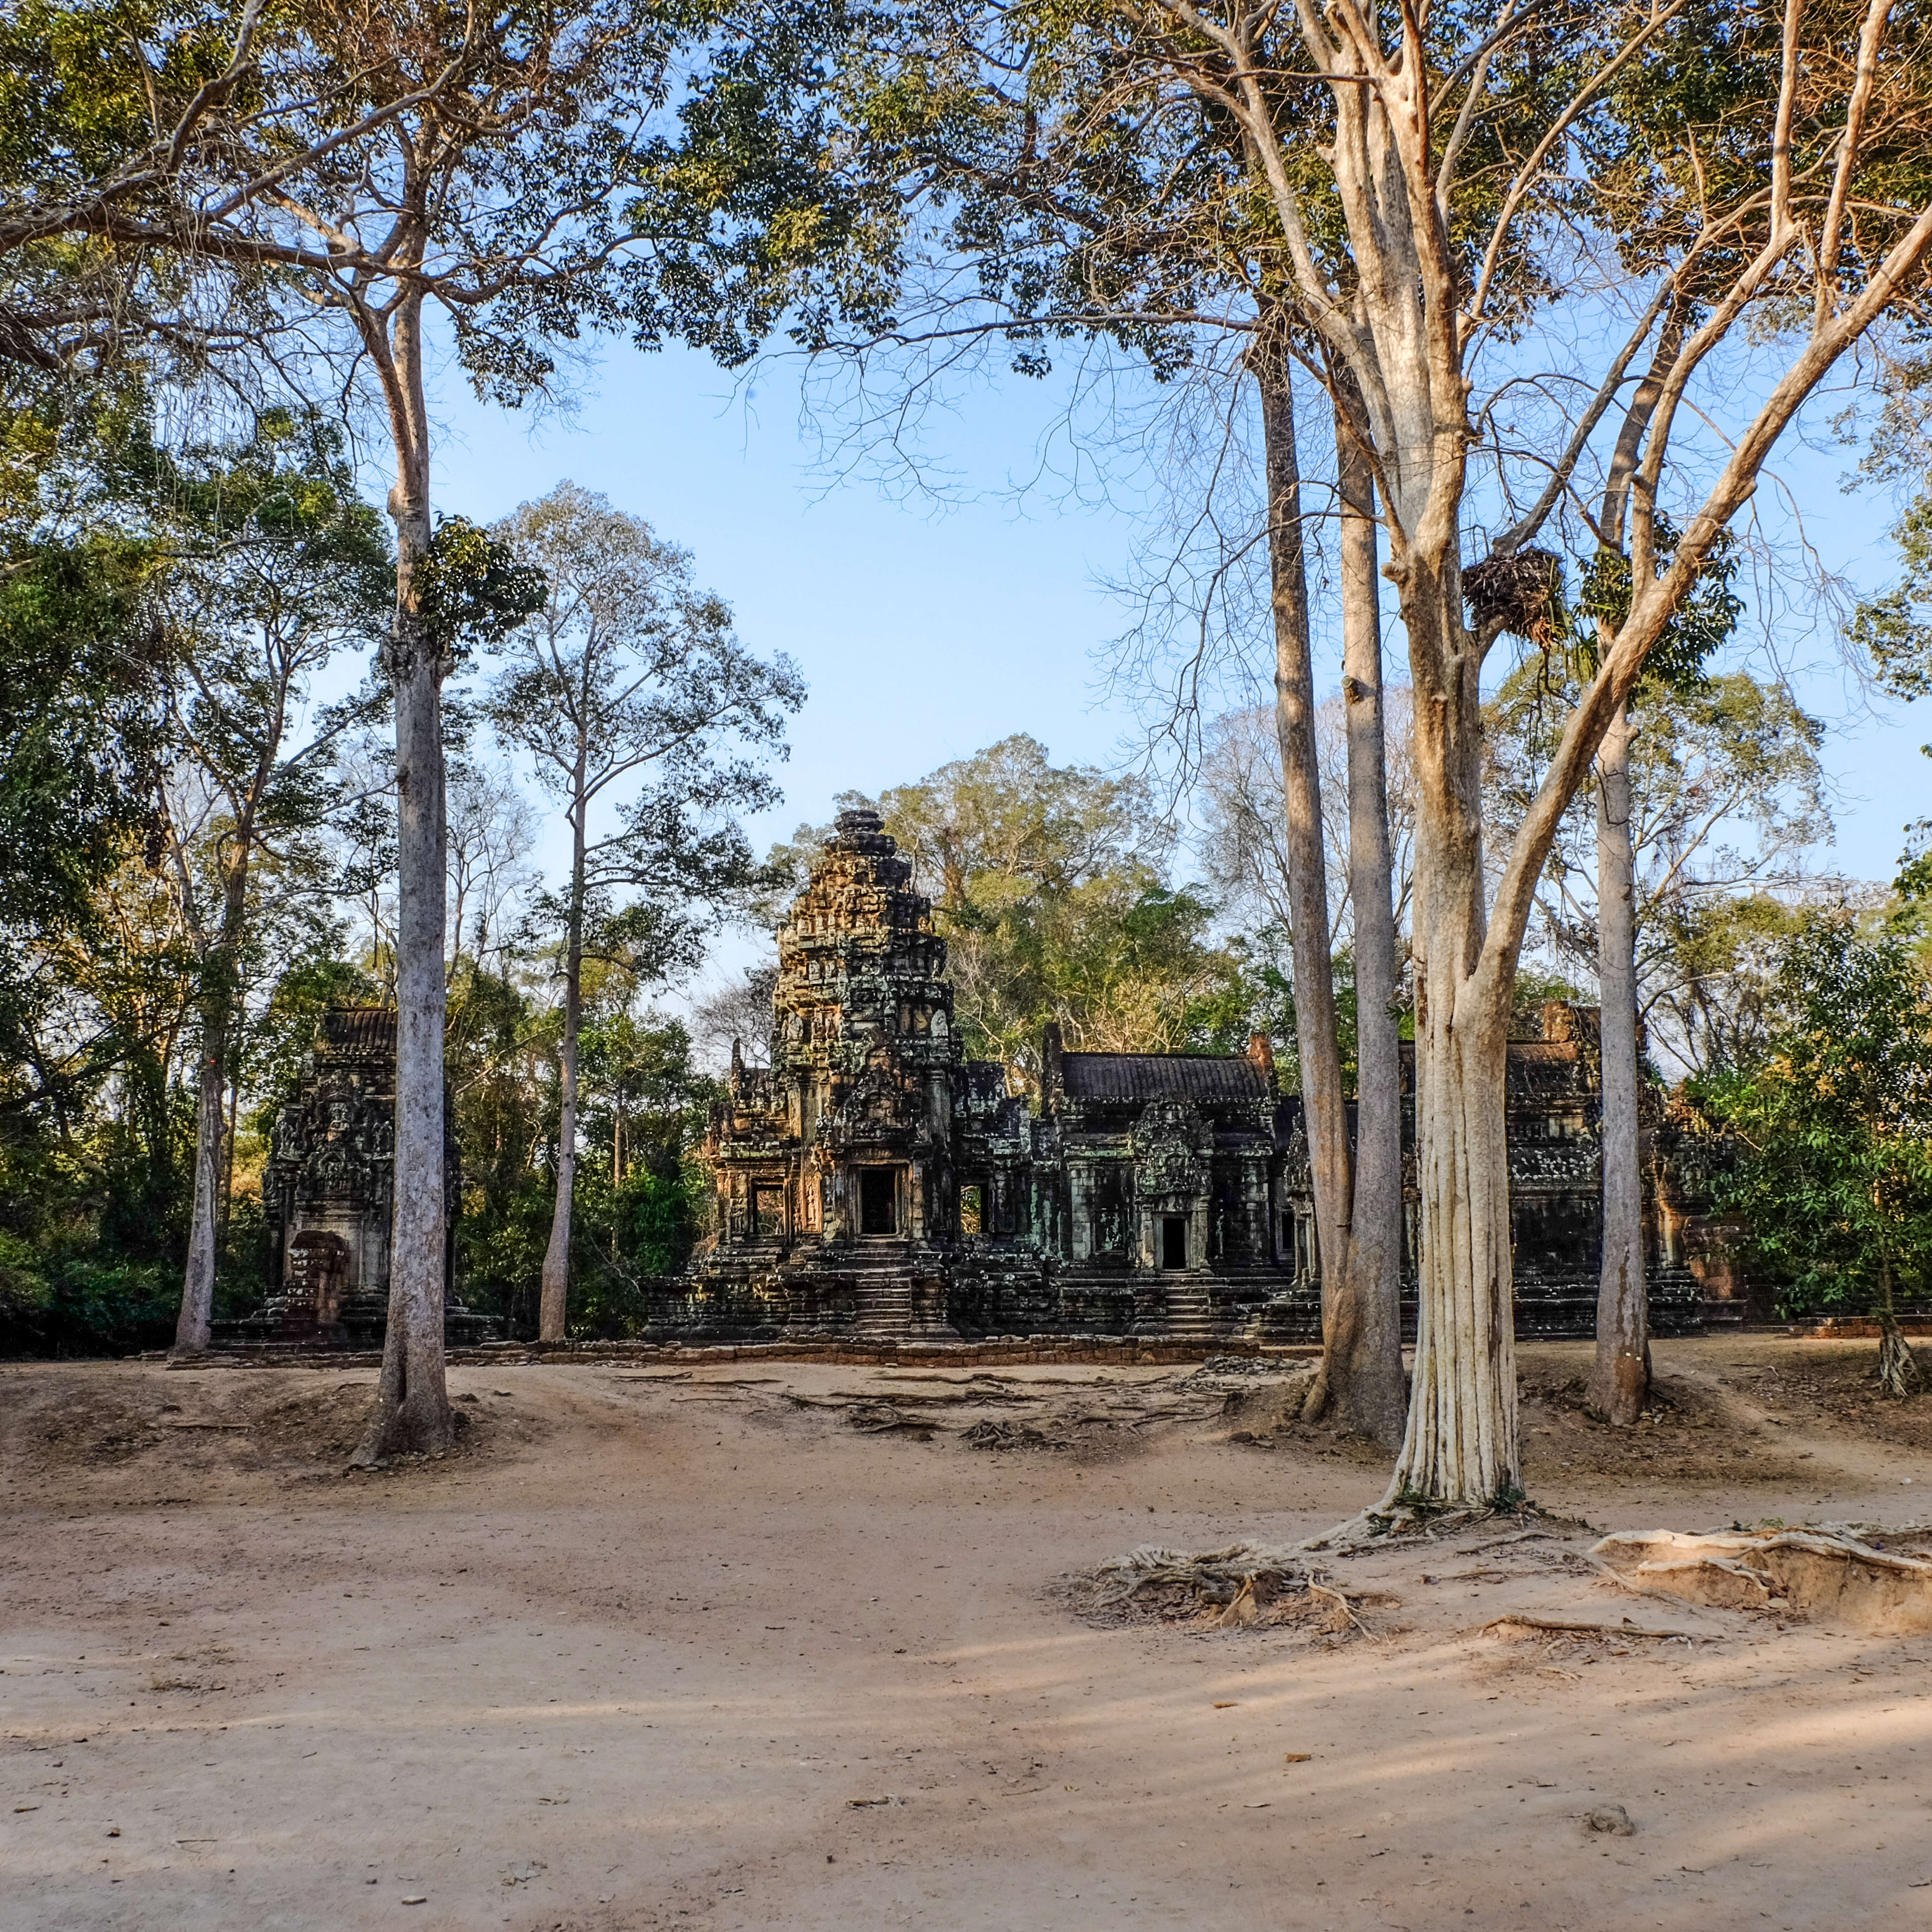 siem reap_angkor wat_architecture on the road_Thommanon and Chau Say Tevoda